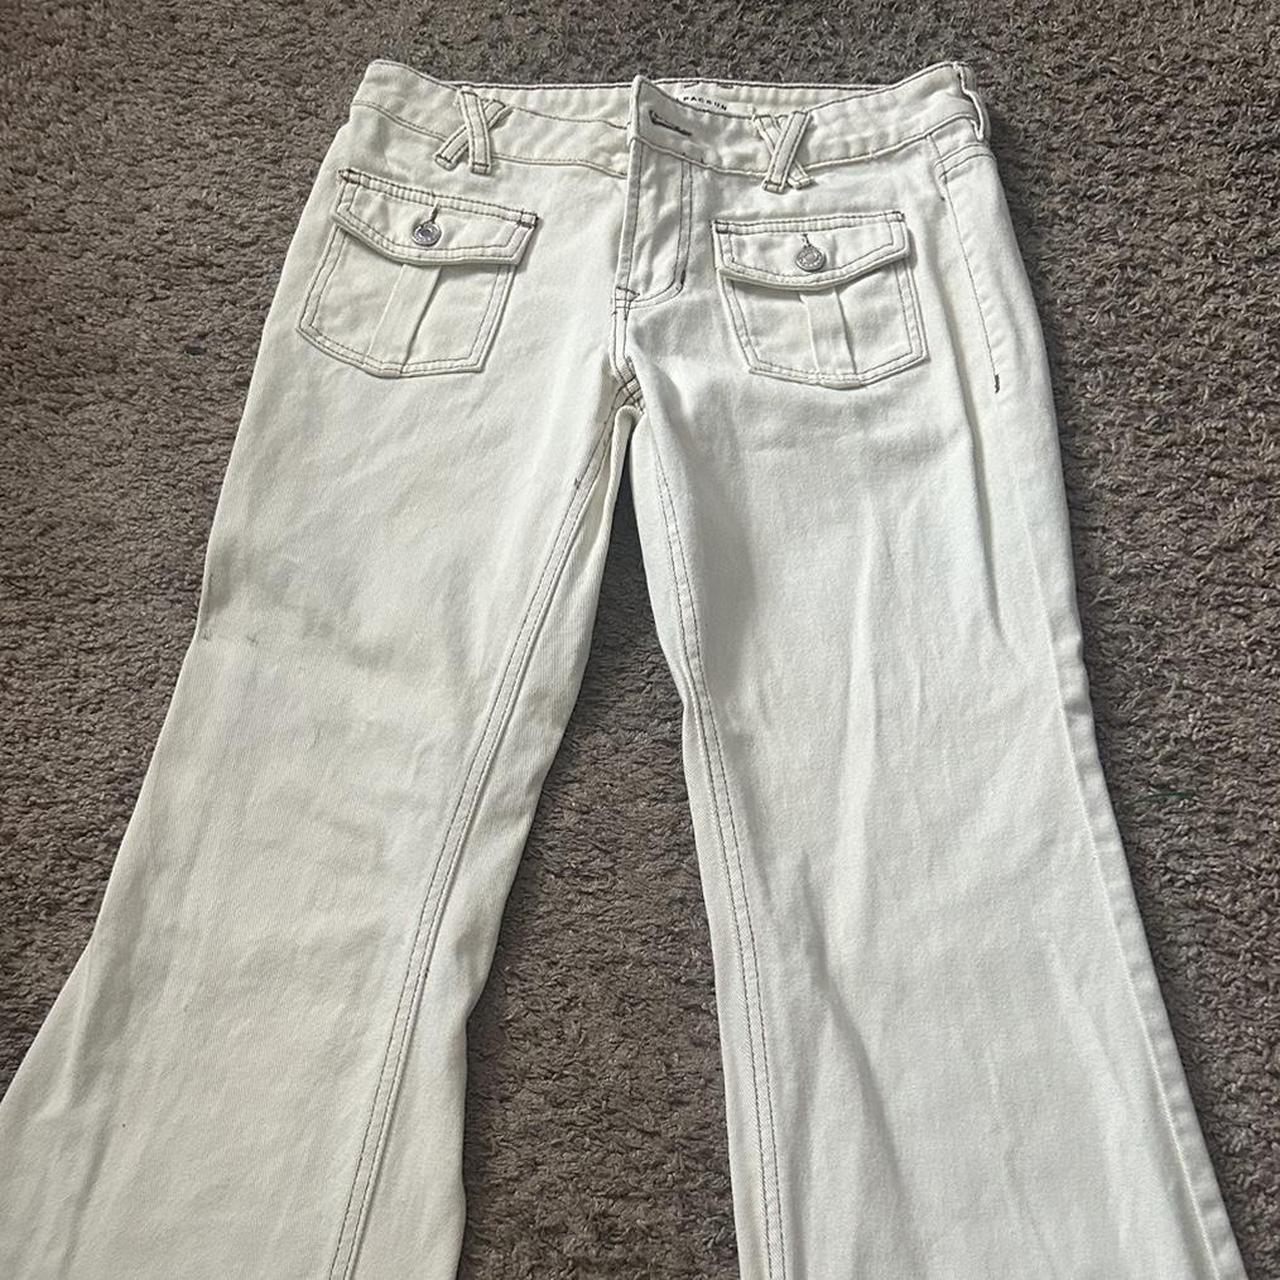 Low rise white flared jeans - Depop